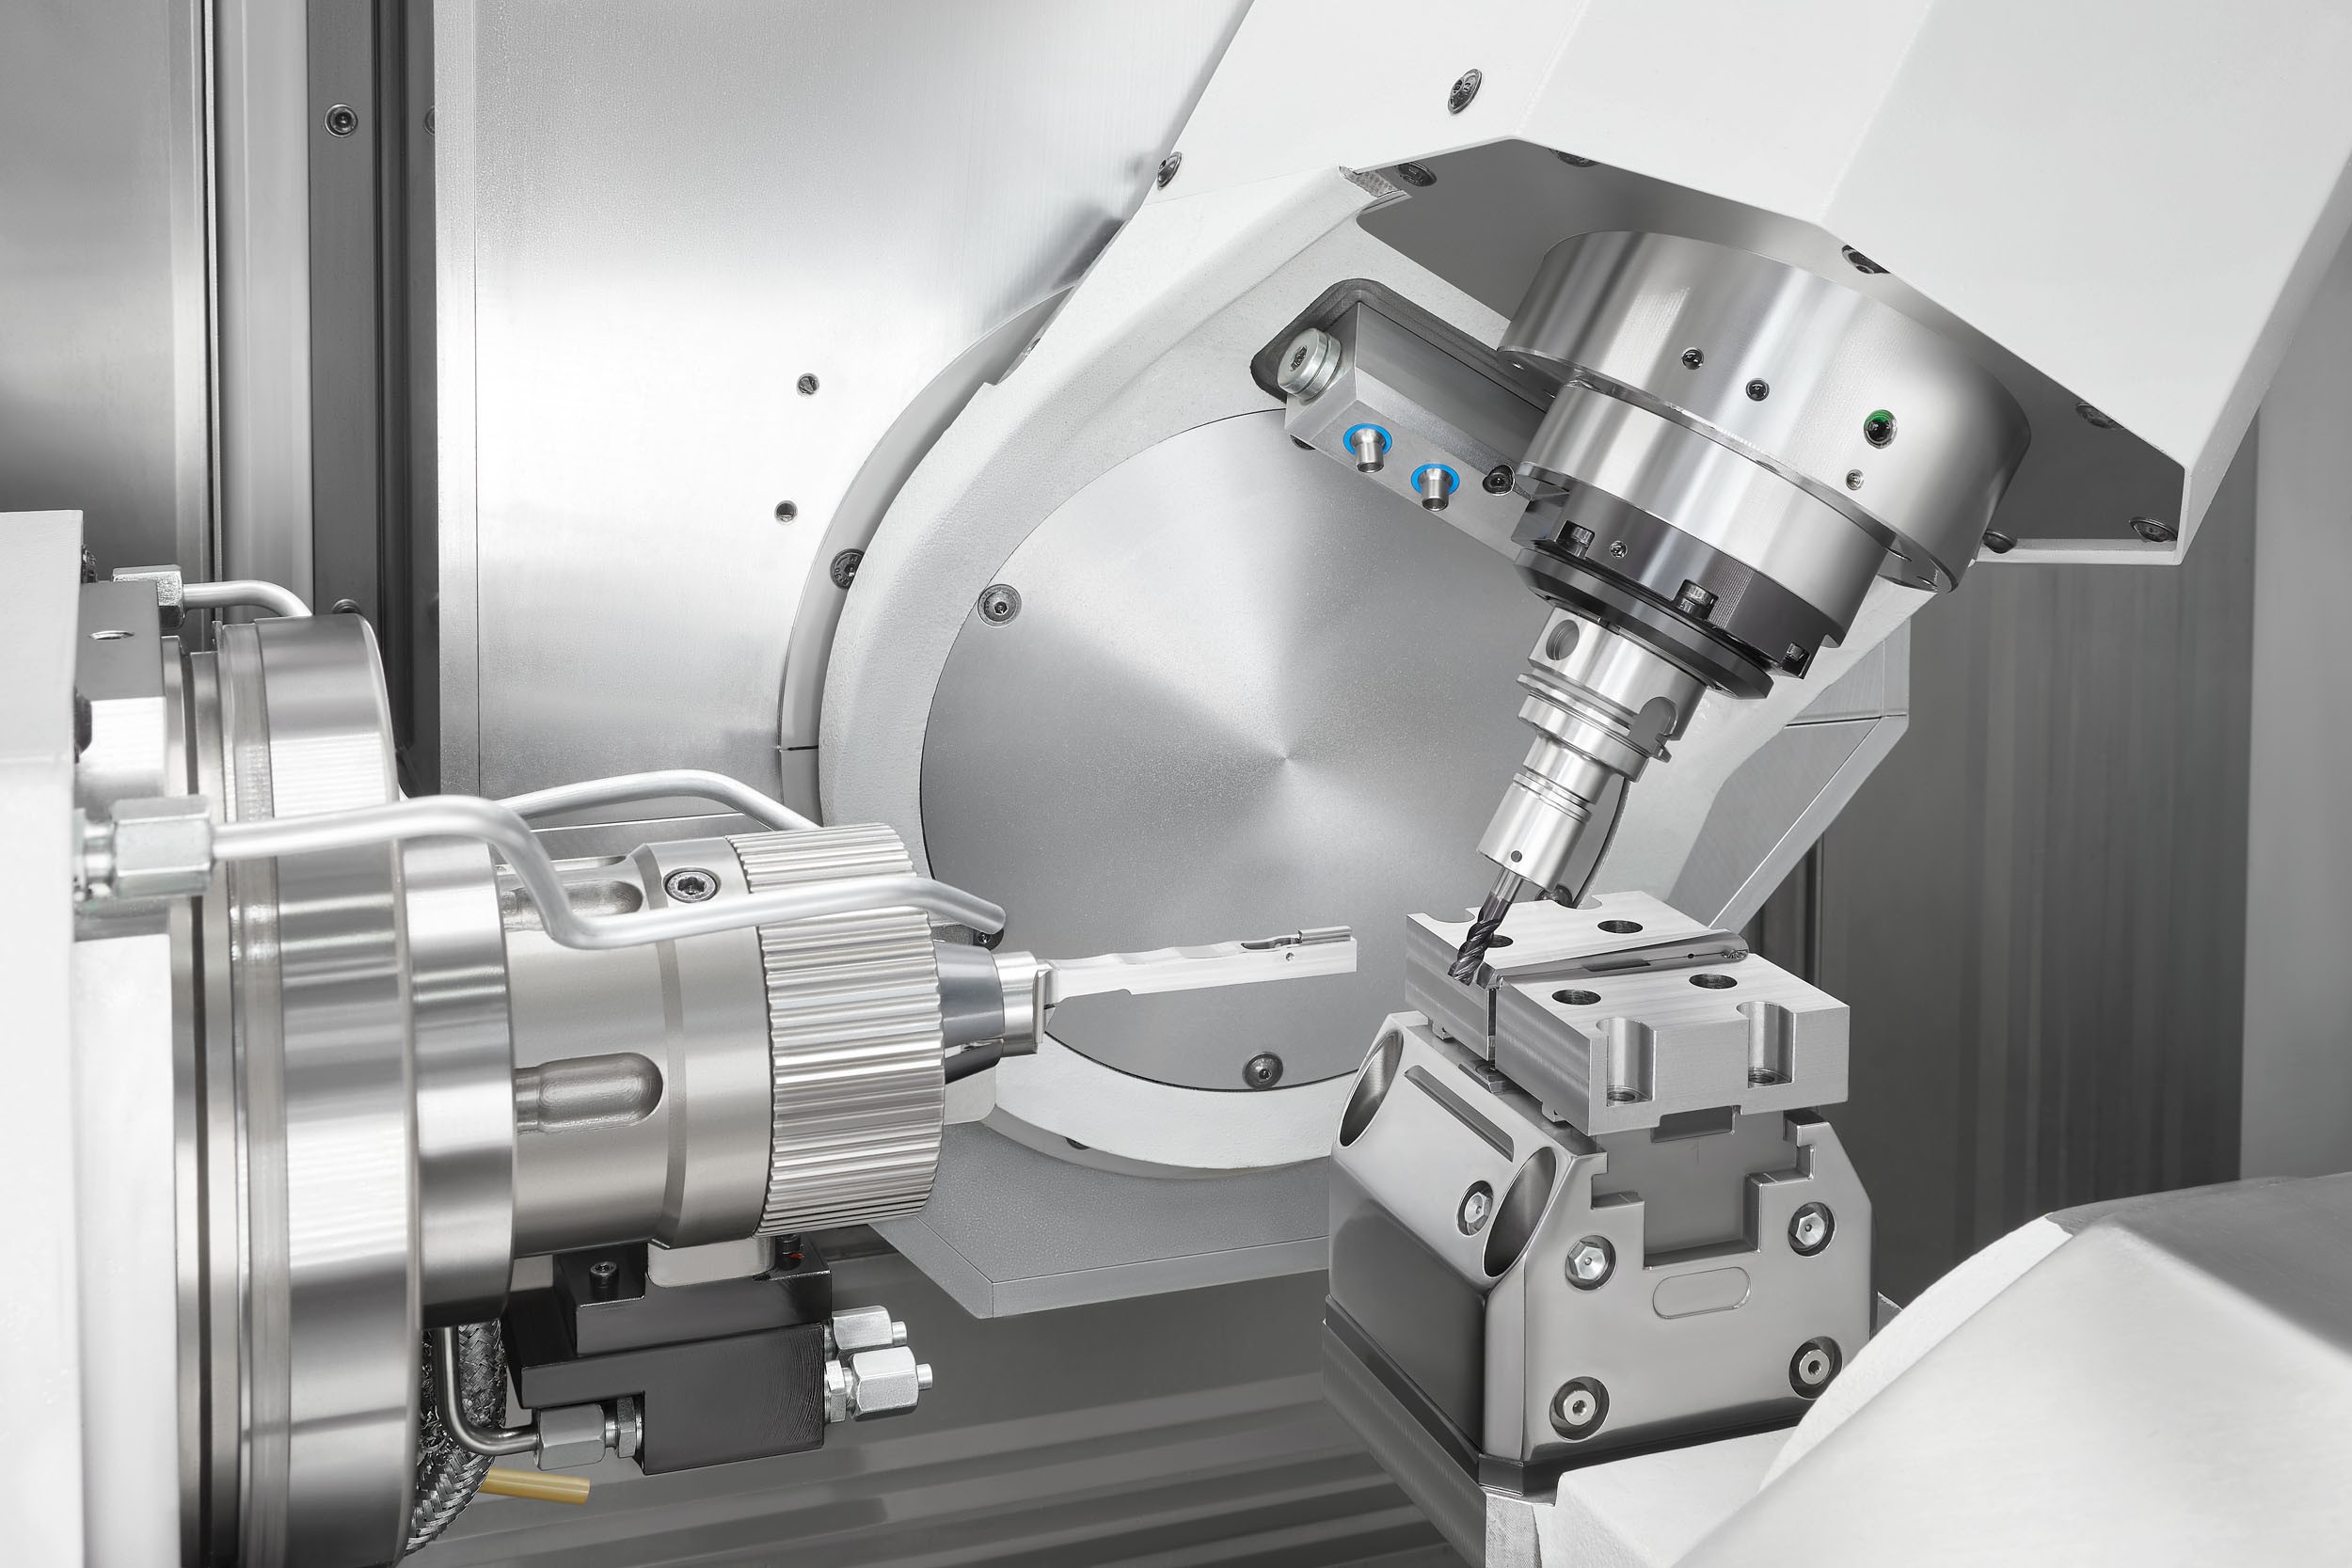 Speed and micron-level precision with six-sided complete machining from the very first part is easily provided with the FZ 08 S mill turn precision+.